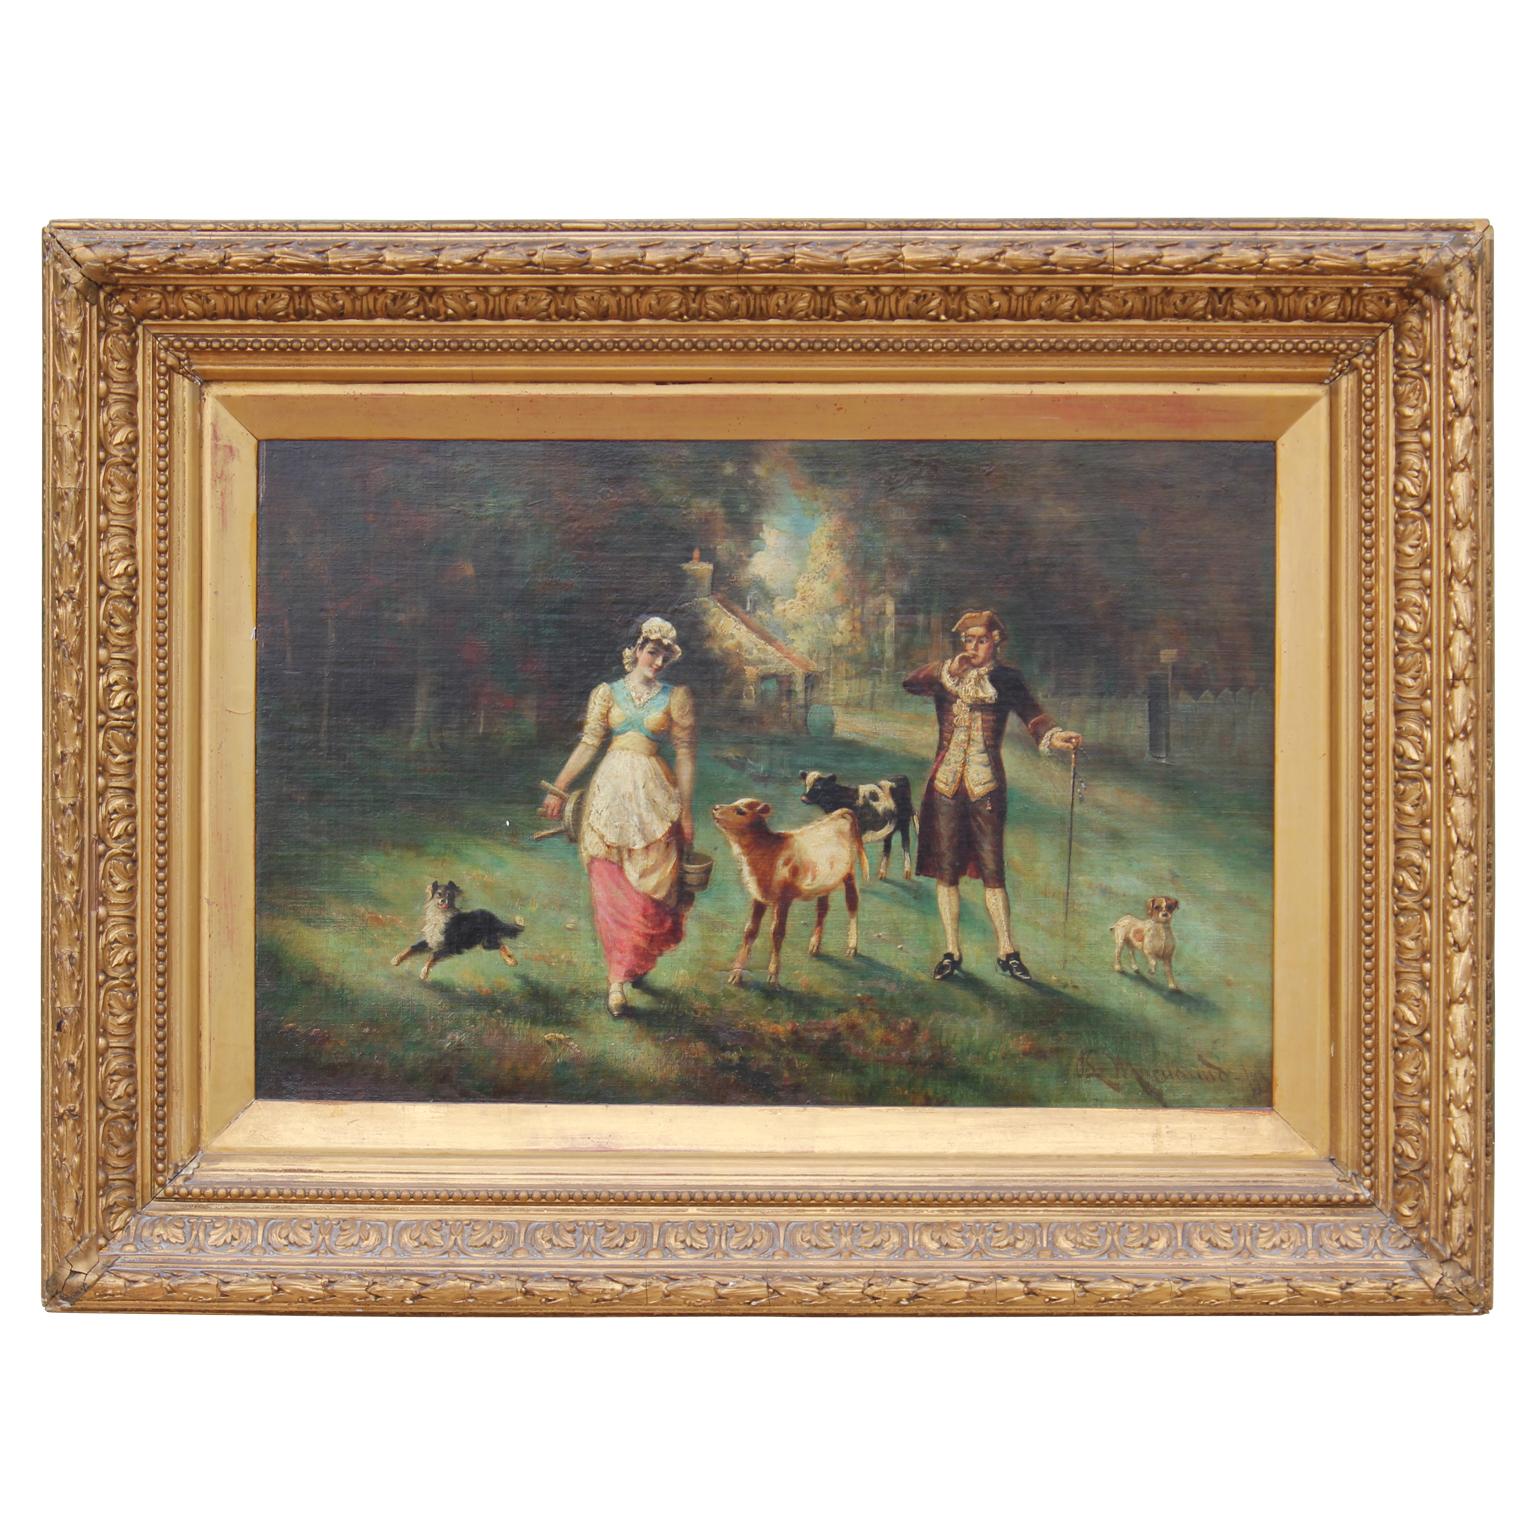 Unknown Figurative Painting - English Country Scene with Milkmaid with Cows and Dog with an Upper Class Male